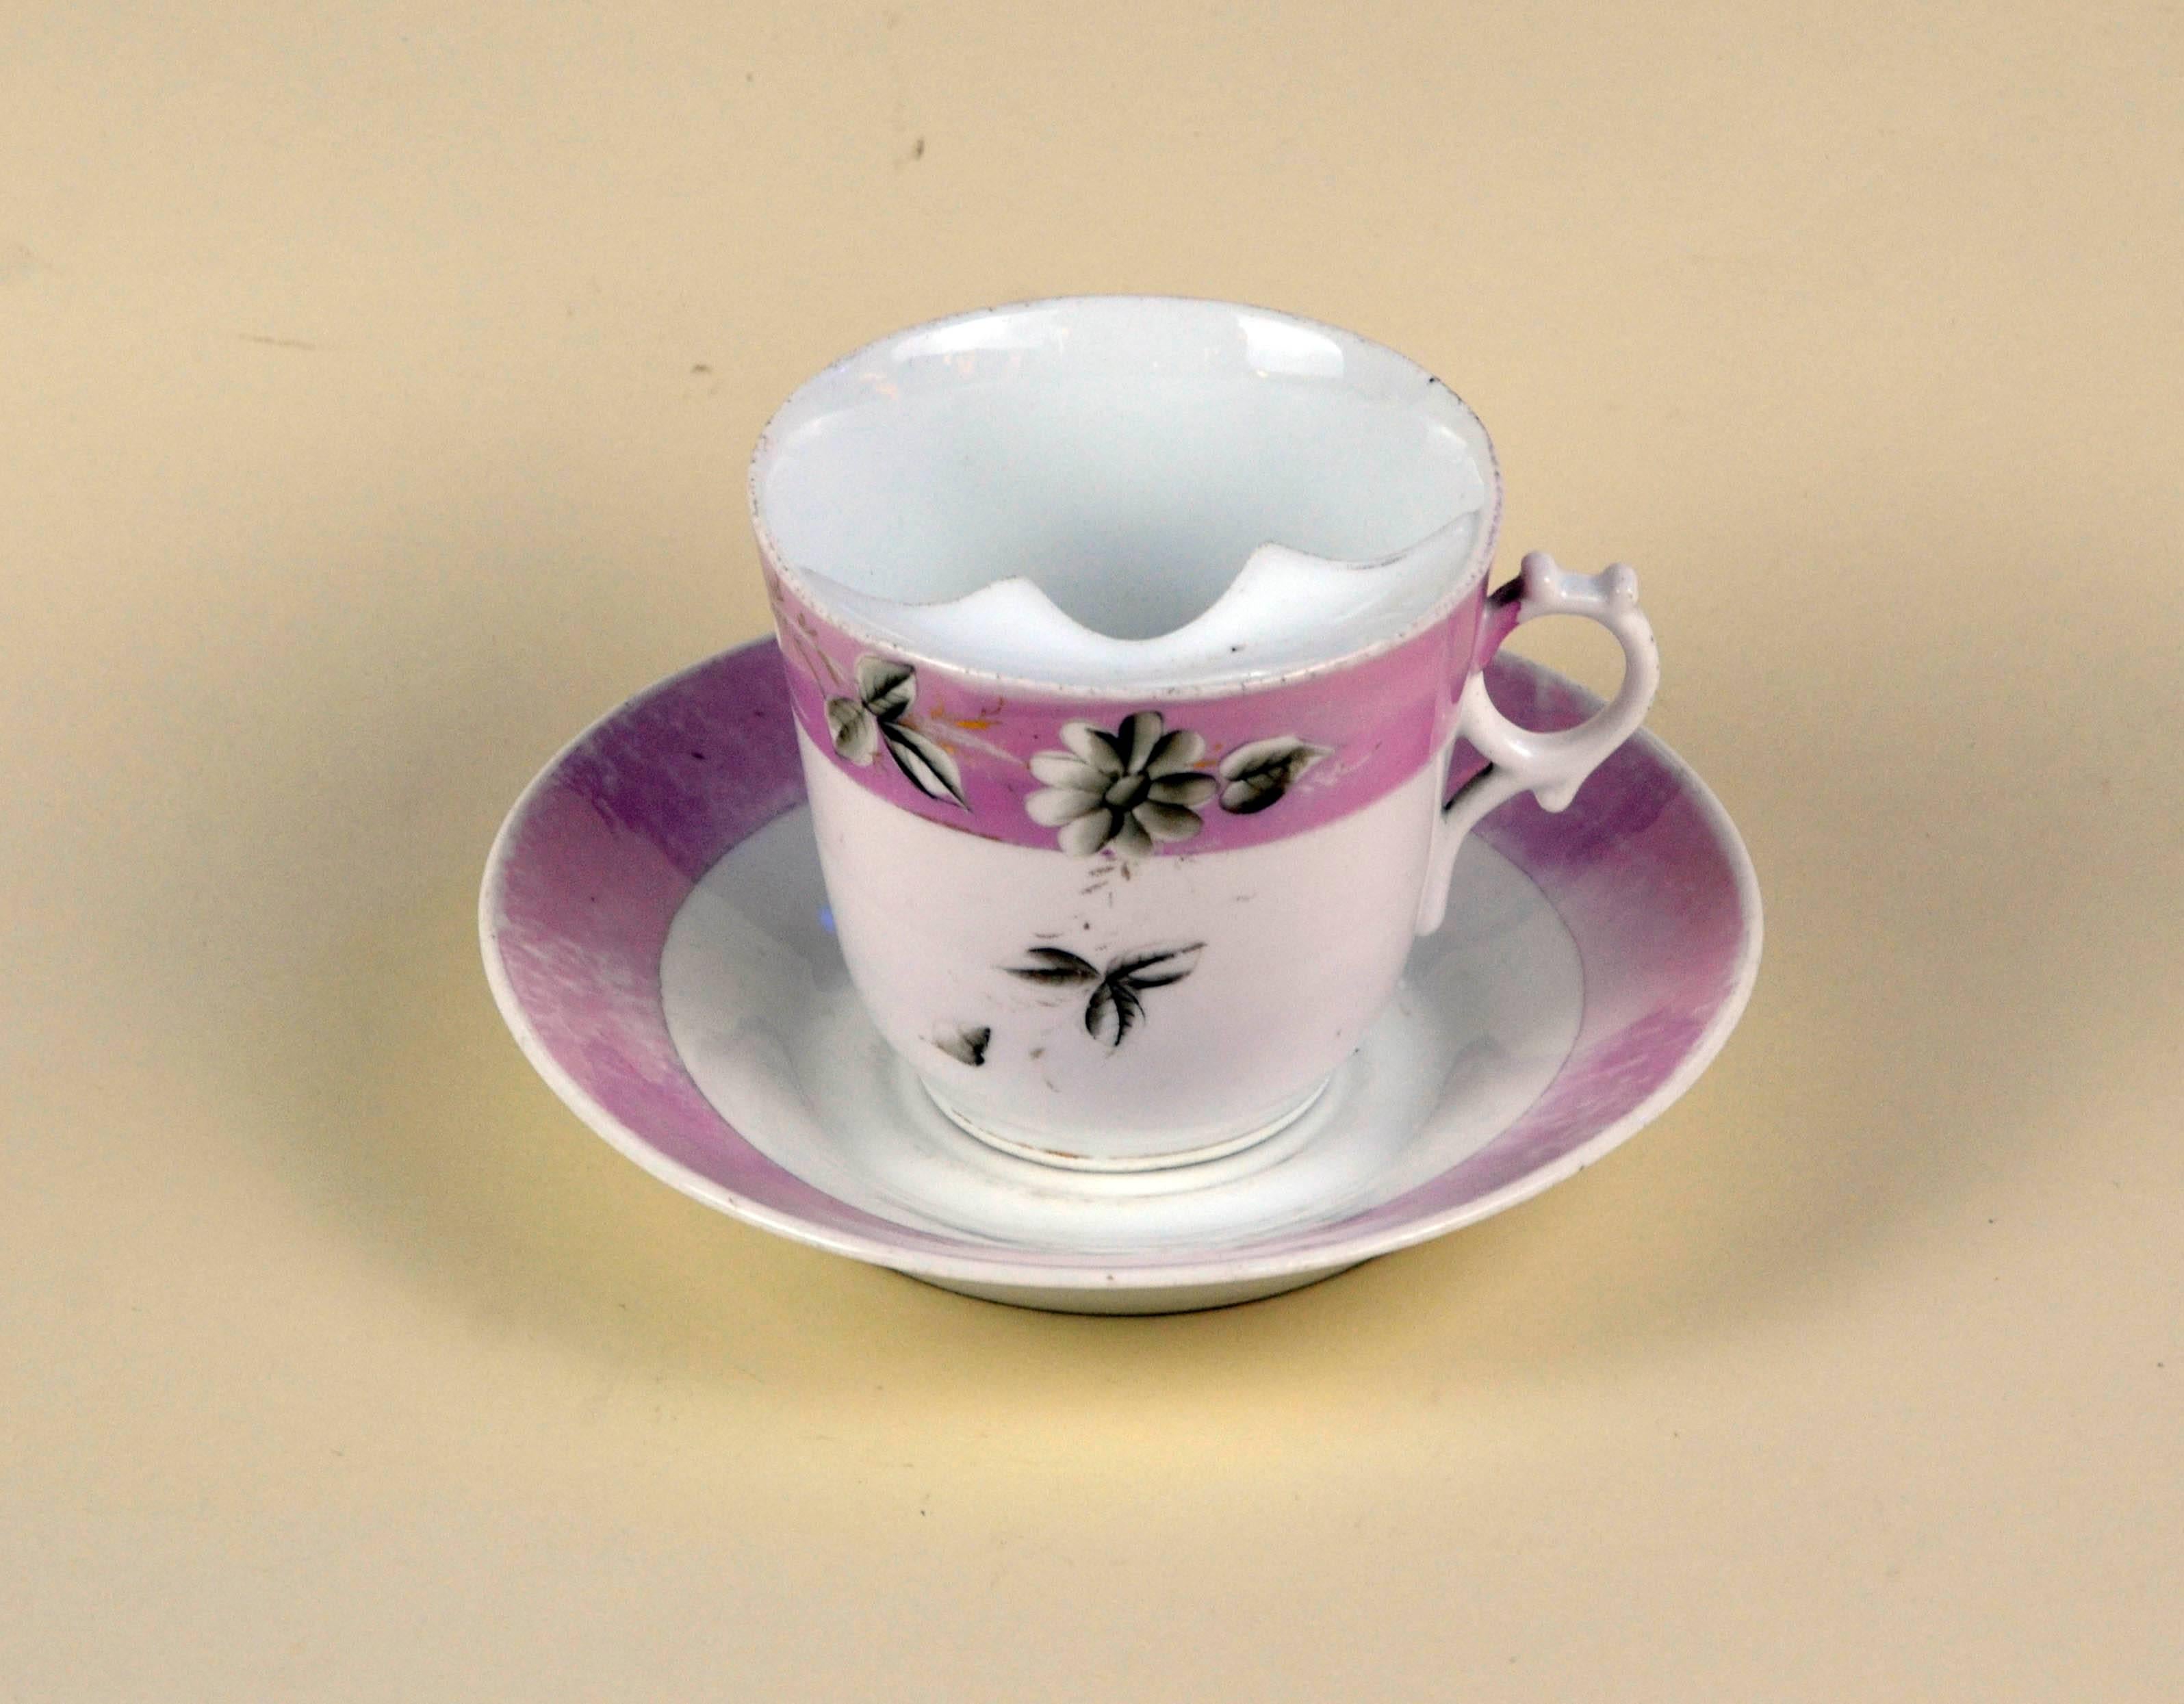 German white porcelain mustache cup finished with floral grey motive on an antique pink lustre band with matching saucer. 

Collector's note: 

The moustache cup (or mustache cup) is a drinking cup with a semicircular ledge inside. The ledge has